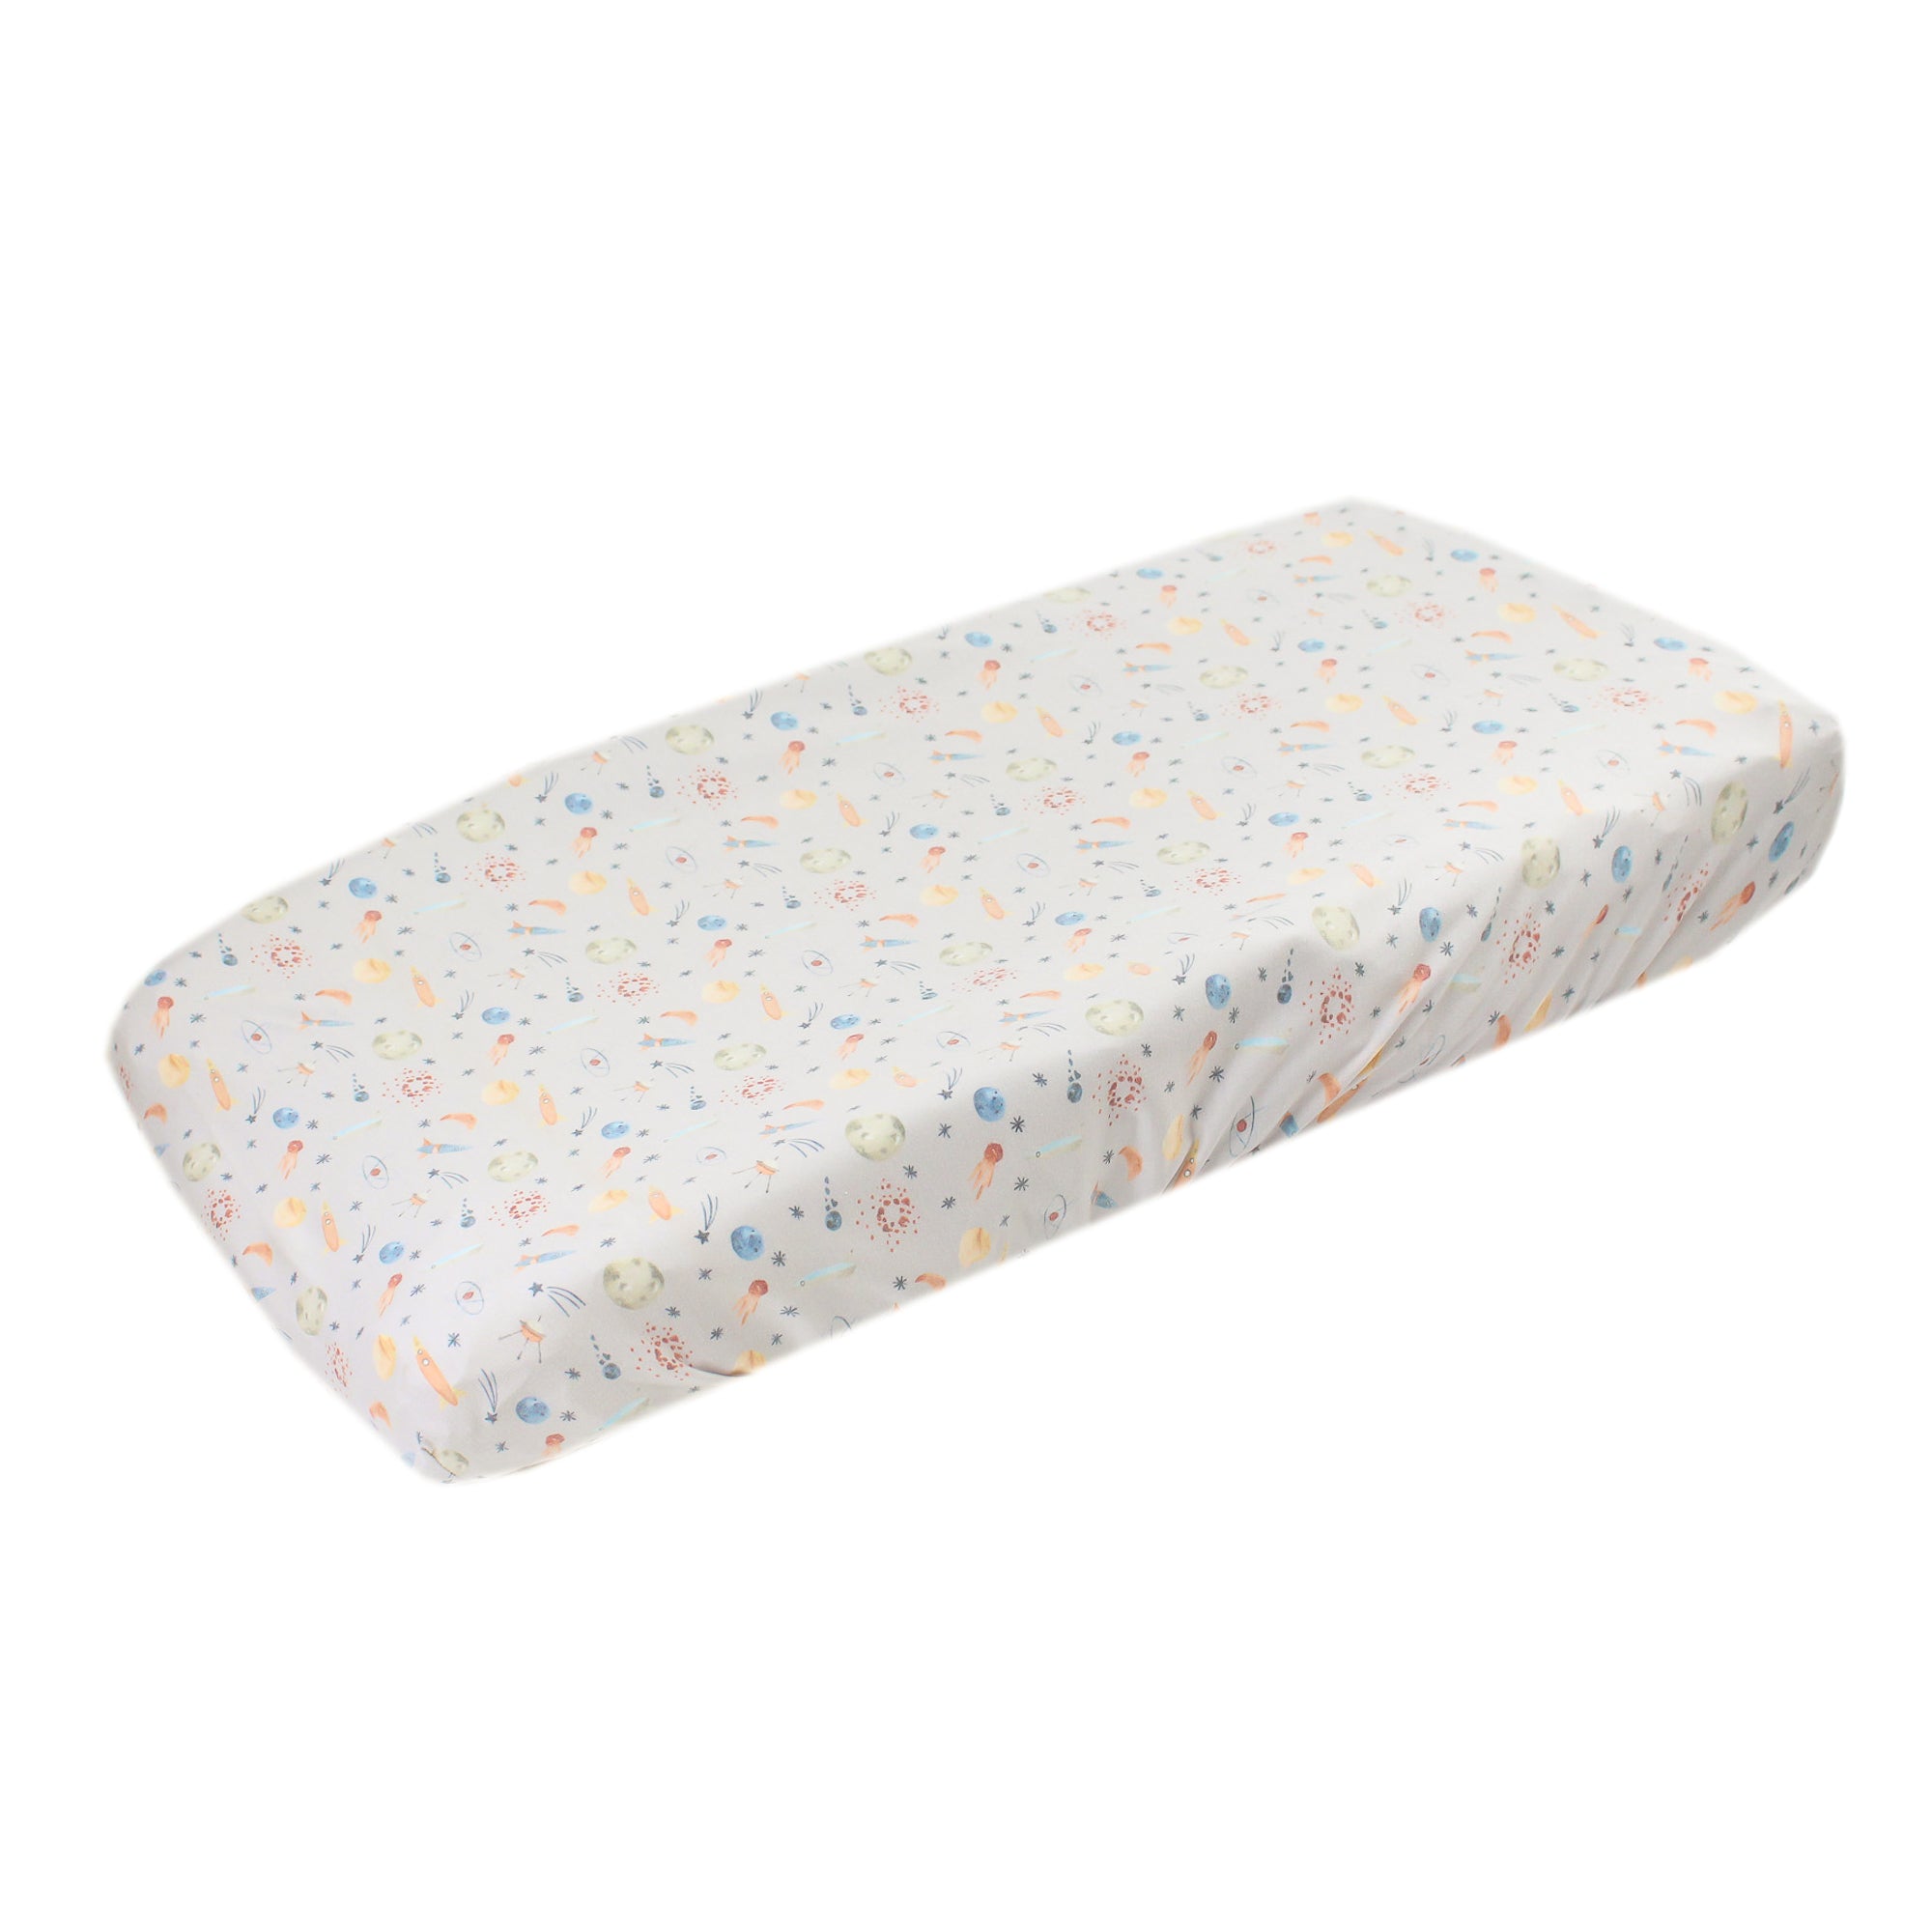 Premium Knit Diaper Changing Pad Cover - Cosmos